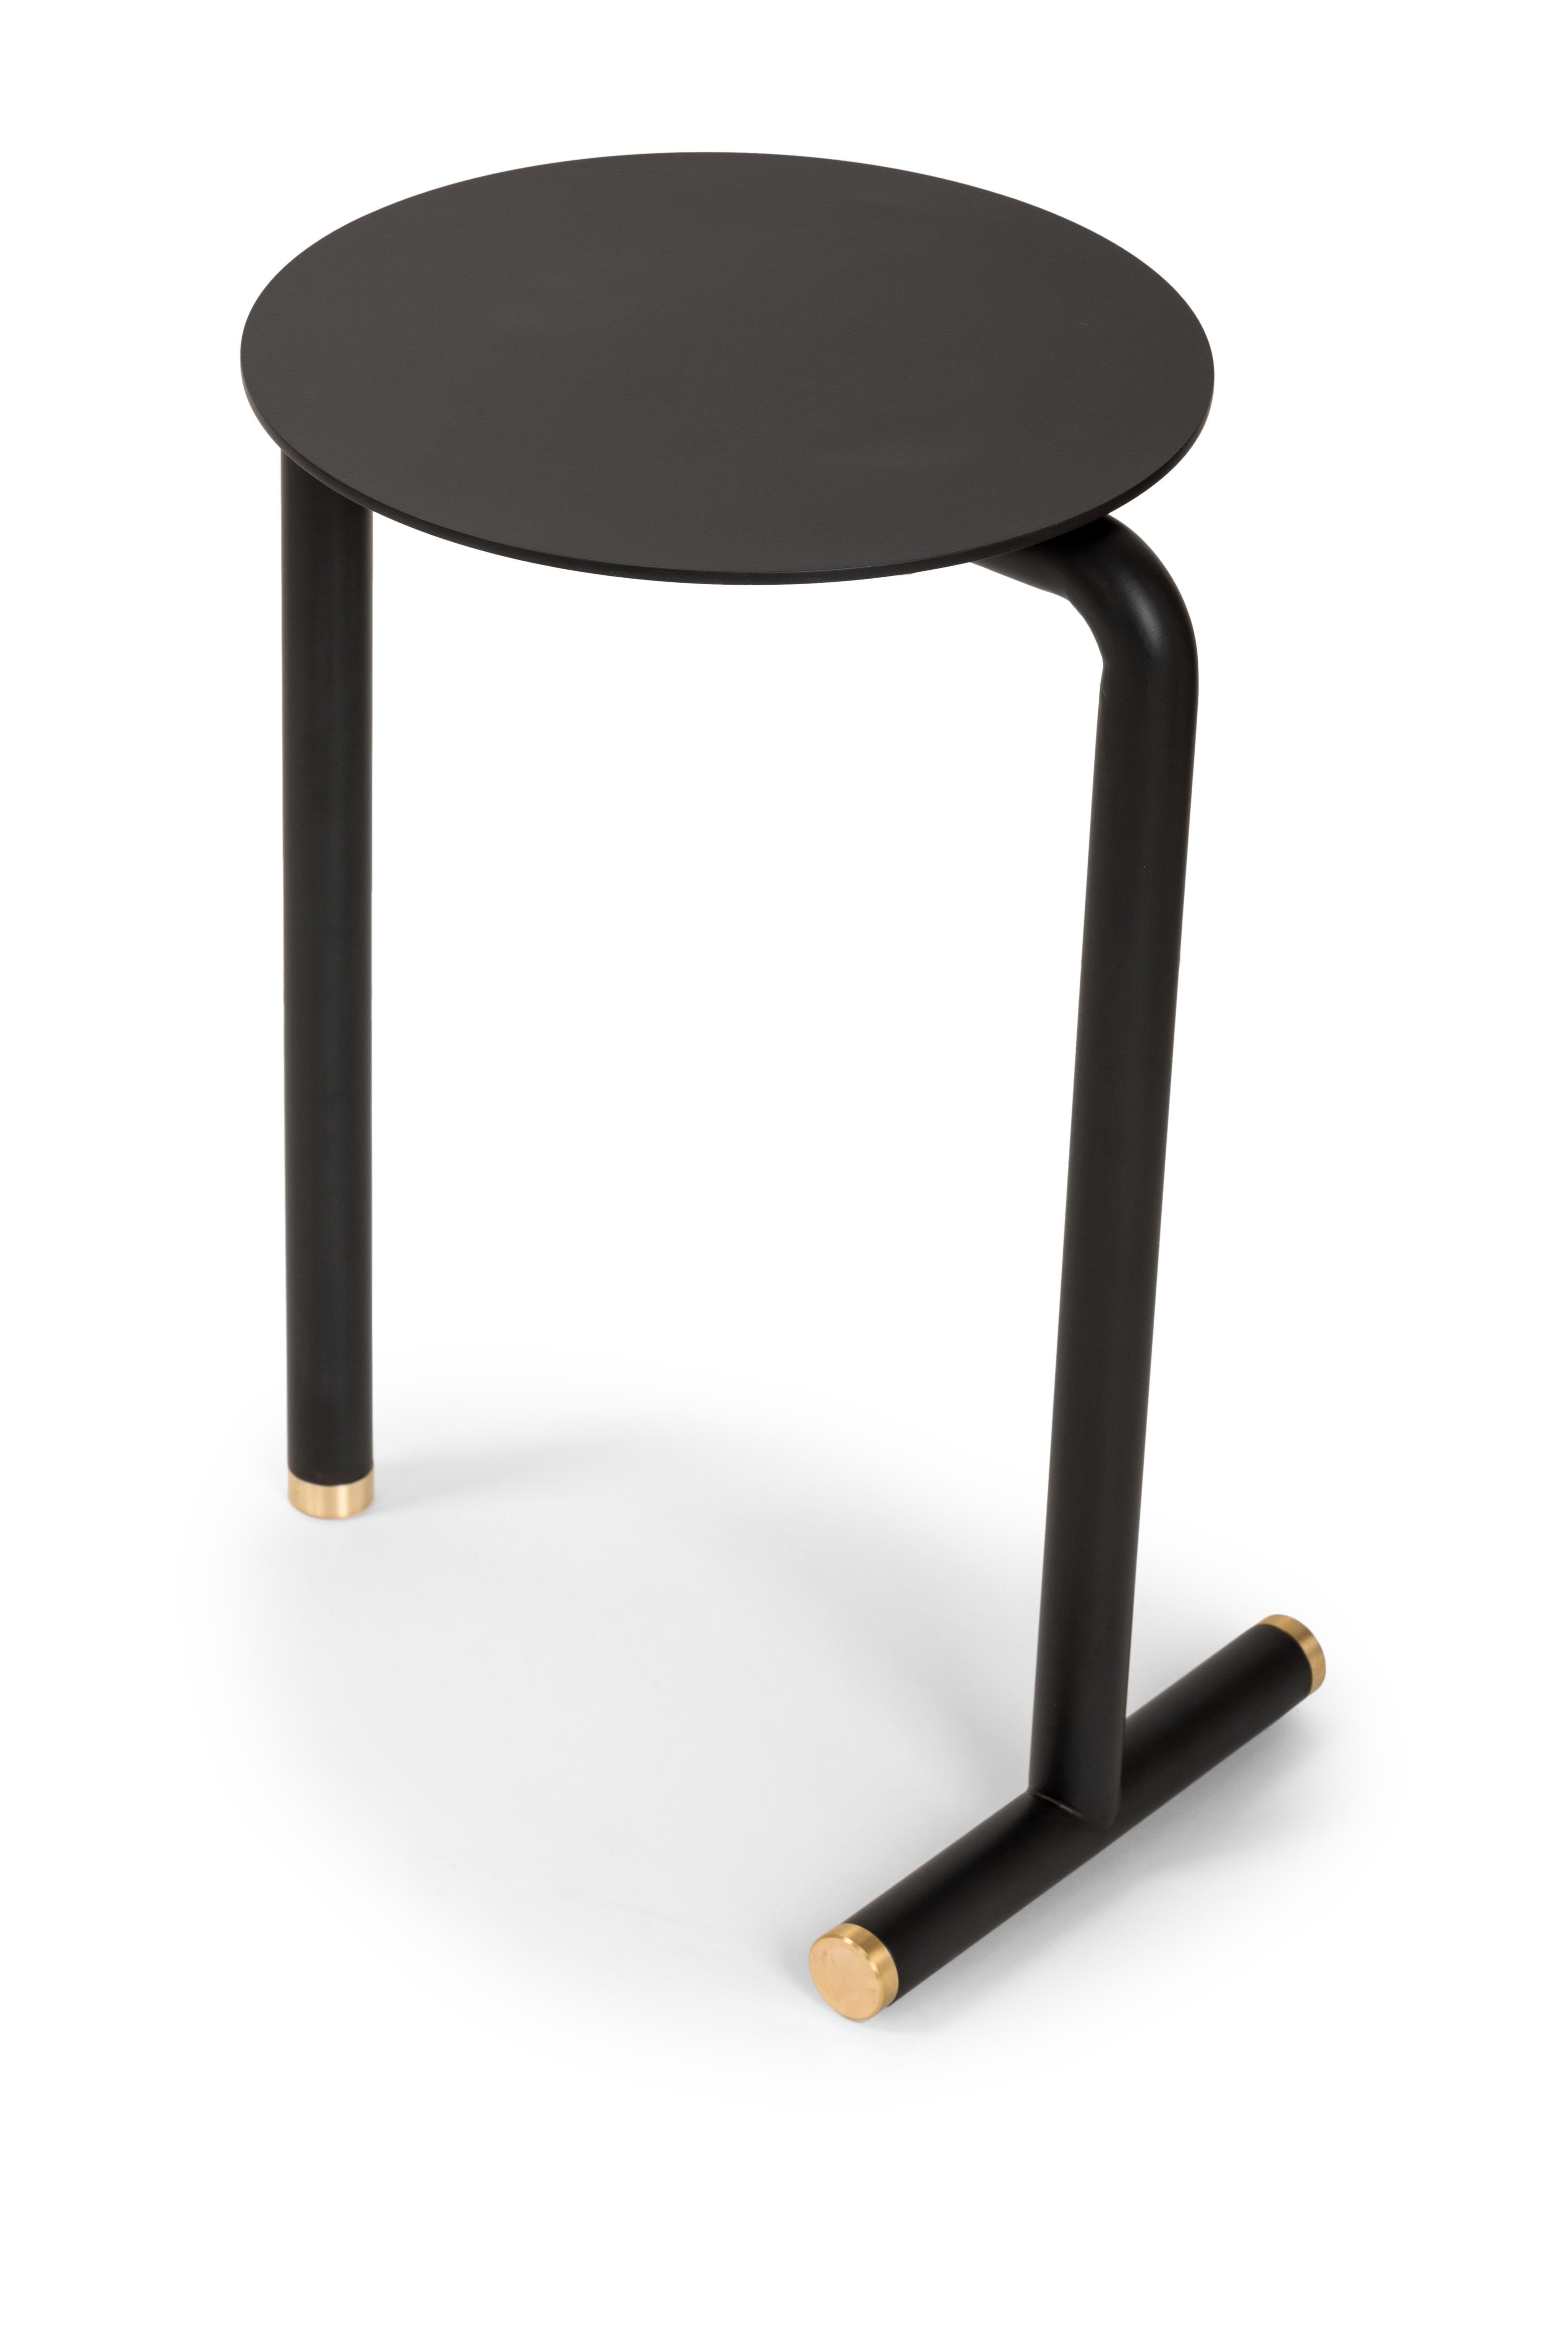 Factory stool by Mingardo
Dimensions: D34 x W32x H46 cm 
Materials: RAL 9005 black varnished iron structure and satin natural brass details
Weight: 7 kg

Also available in different finishes. 

The finesse of the artisan is met with the